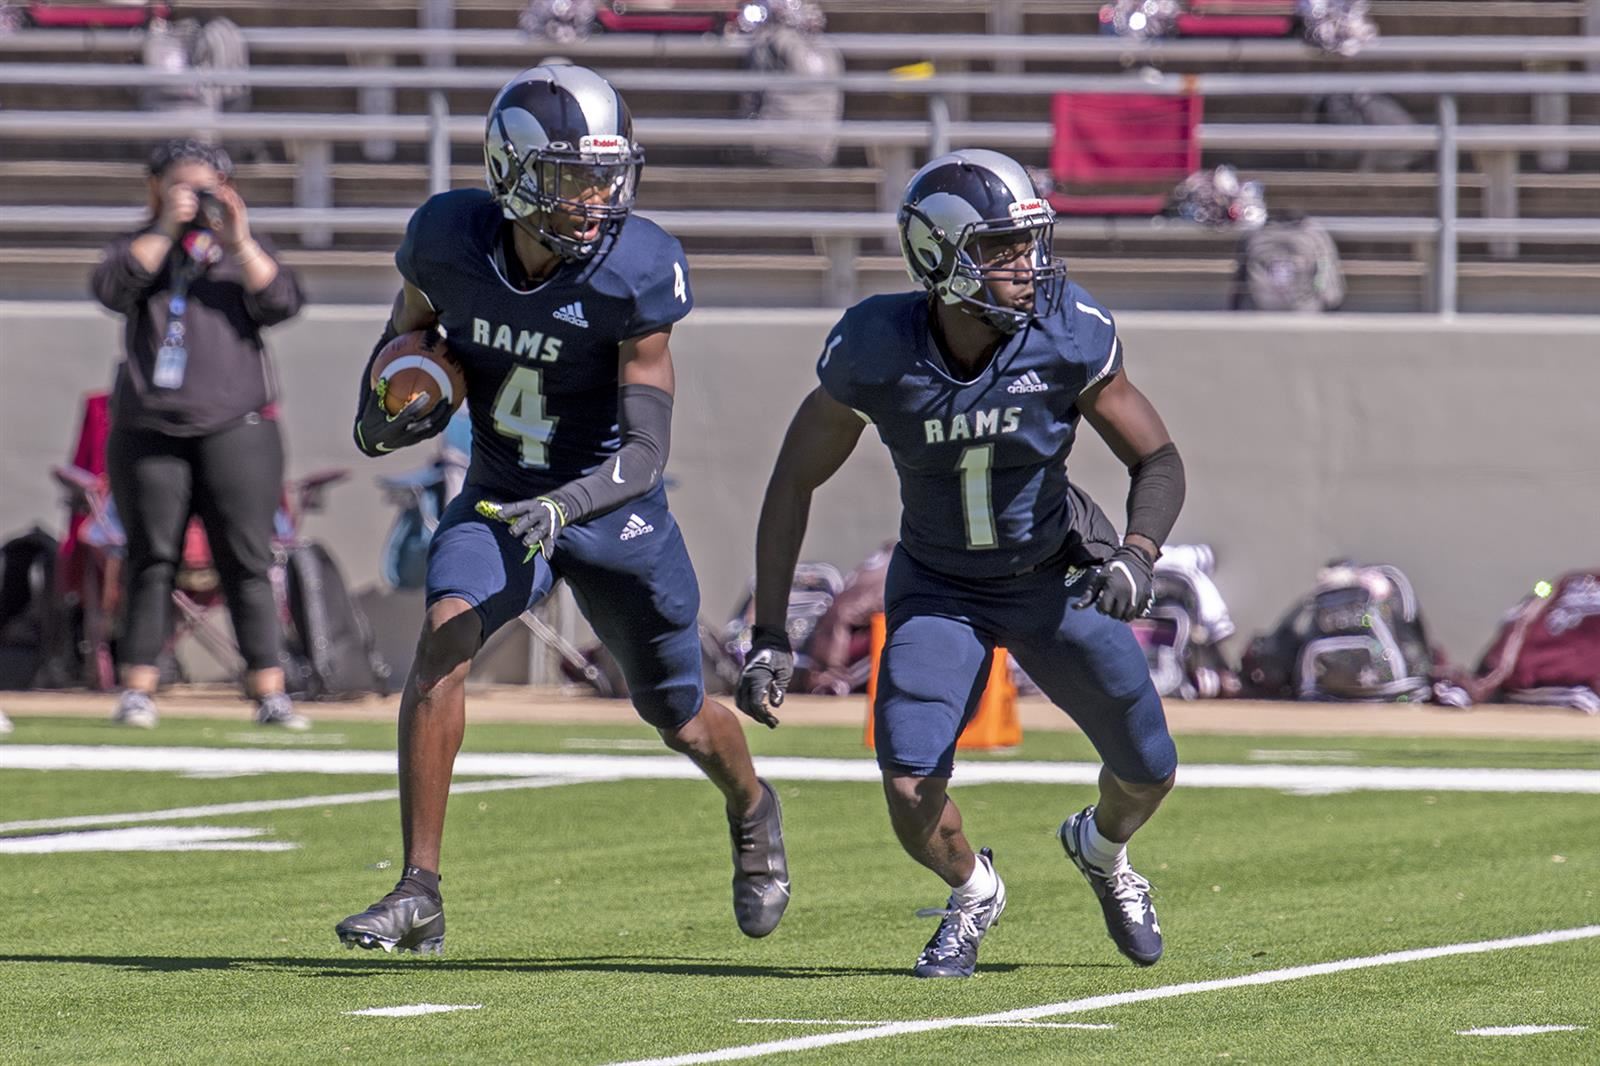 Cypress Ridge High School teammates AJ Gooden-Dottin, left, and Aaron Woods were both named to the All-District 17-6A team.